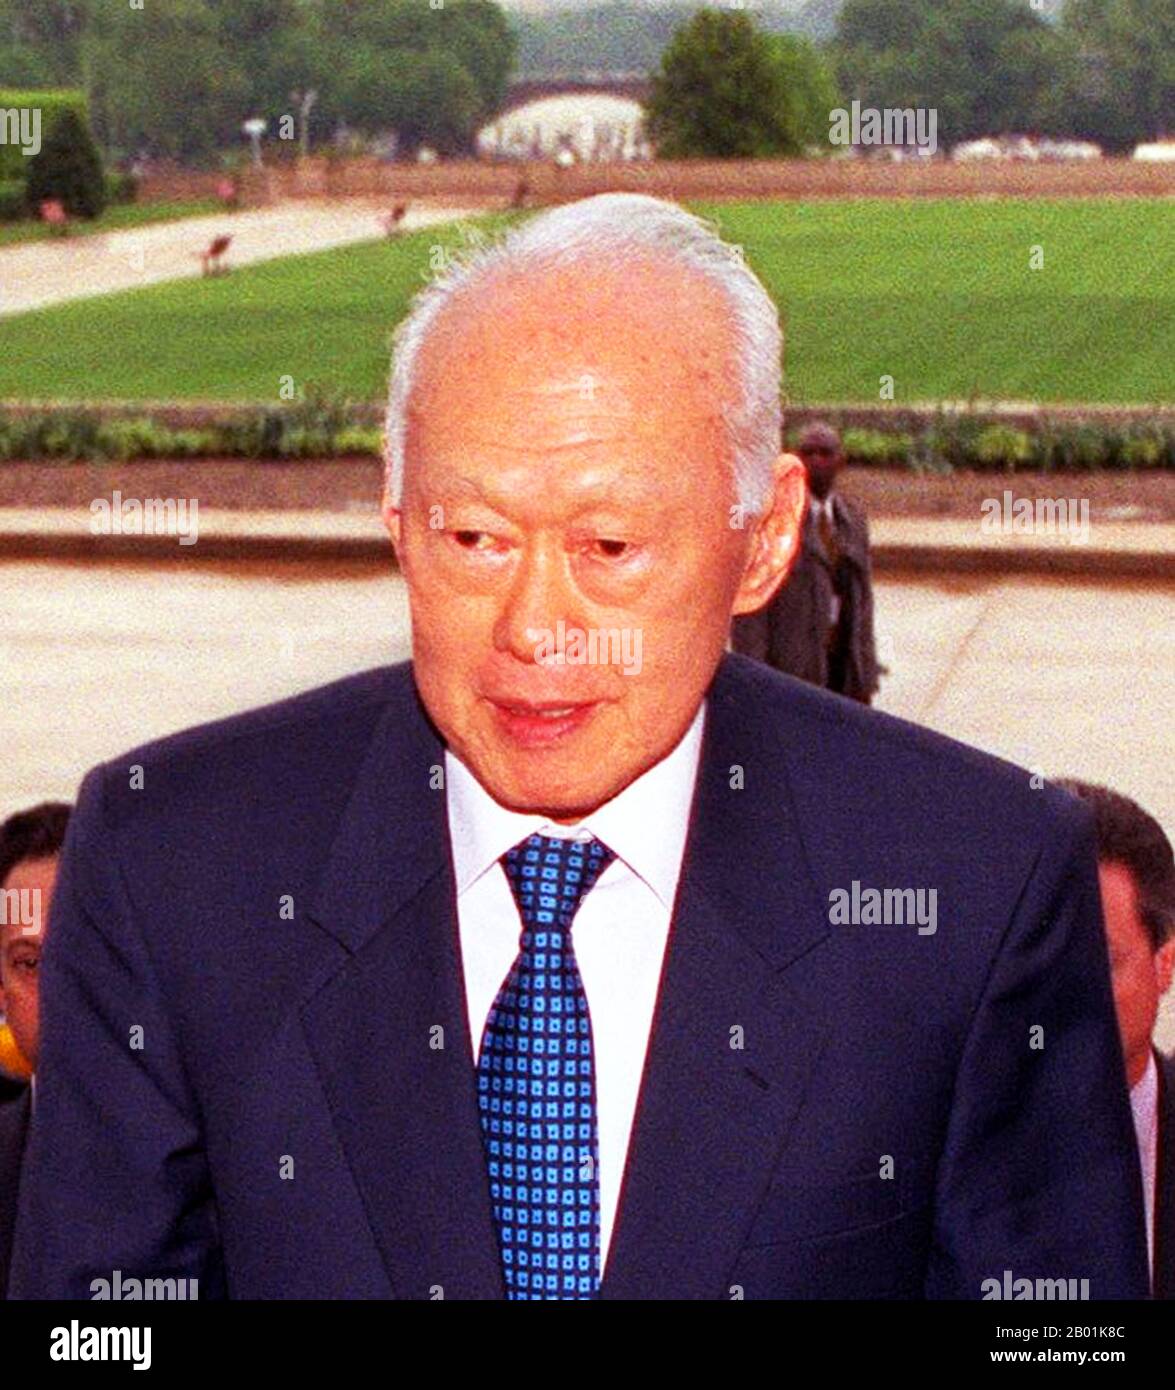 Singapore: Lee Kuan Yew (16 September 1923 - 23 March 2015), first Prime Minister of the Republic of Singapore (r. 1959-1990), being escorted into the Pentagon, USA, during his time as Senior Minister (r. 1990-2004), 2 May 2002.  Lee Kuan Yew, GCMG, CH (also Lee Kwan-Yew), is a Singaporean statesman. He was the first Prime Minister of the Republic of Singapore and was one of the longest serving Prime Ministers in the world. He oversaw the separation of Singapore from Malaysia in 1965 and its subsequent transformation from a underdeveloped colonial outpost into a major Asian economic power. Stock Photo